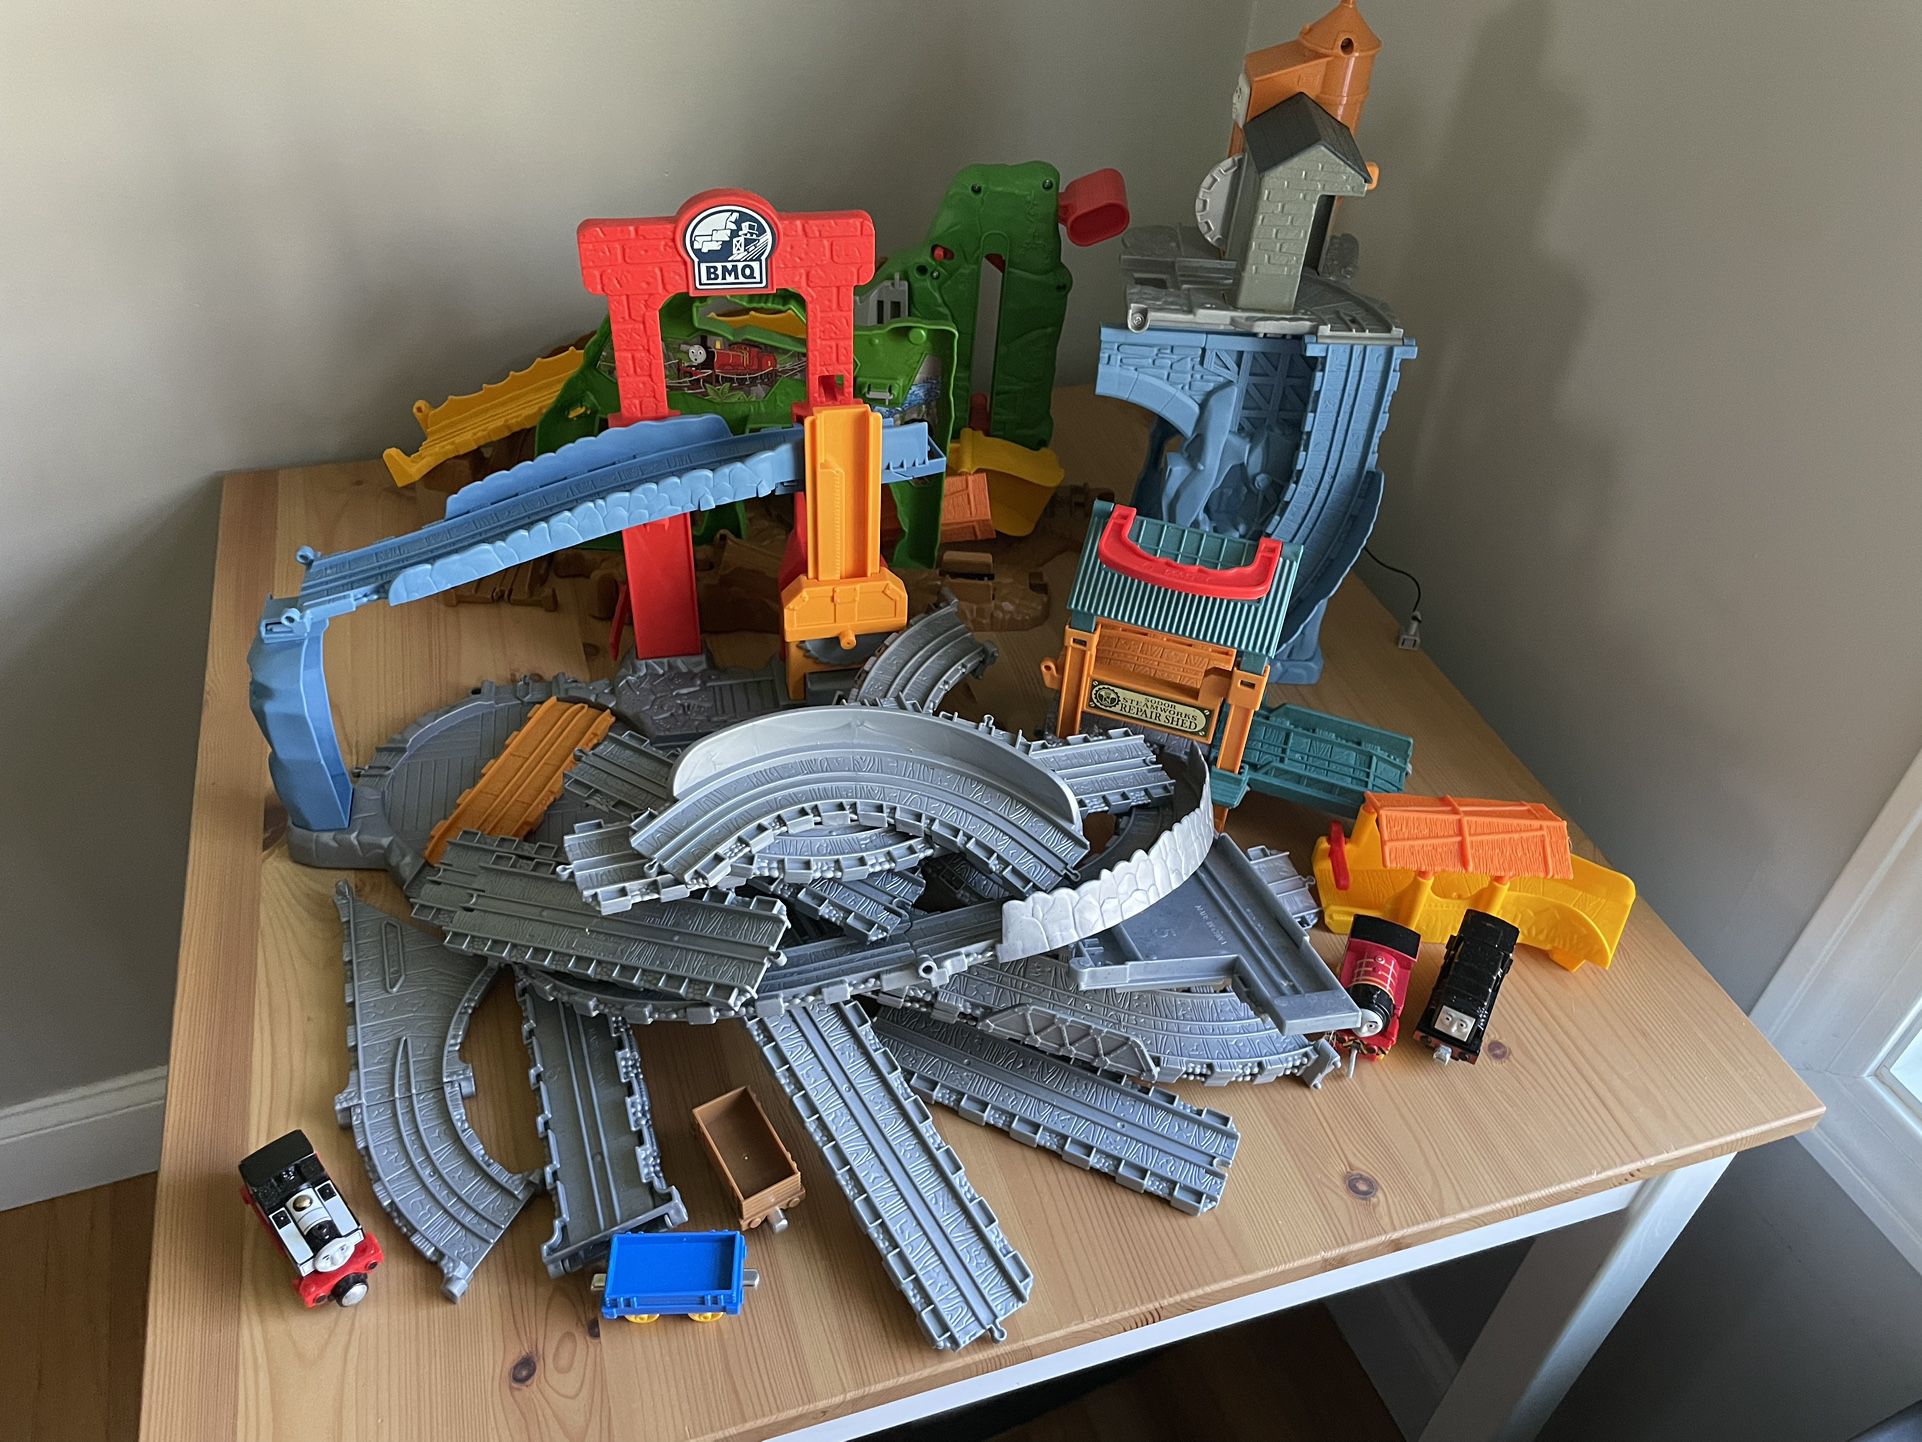 Thomas The Train & Friends Large Lot Tracks Playsets 